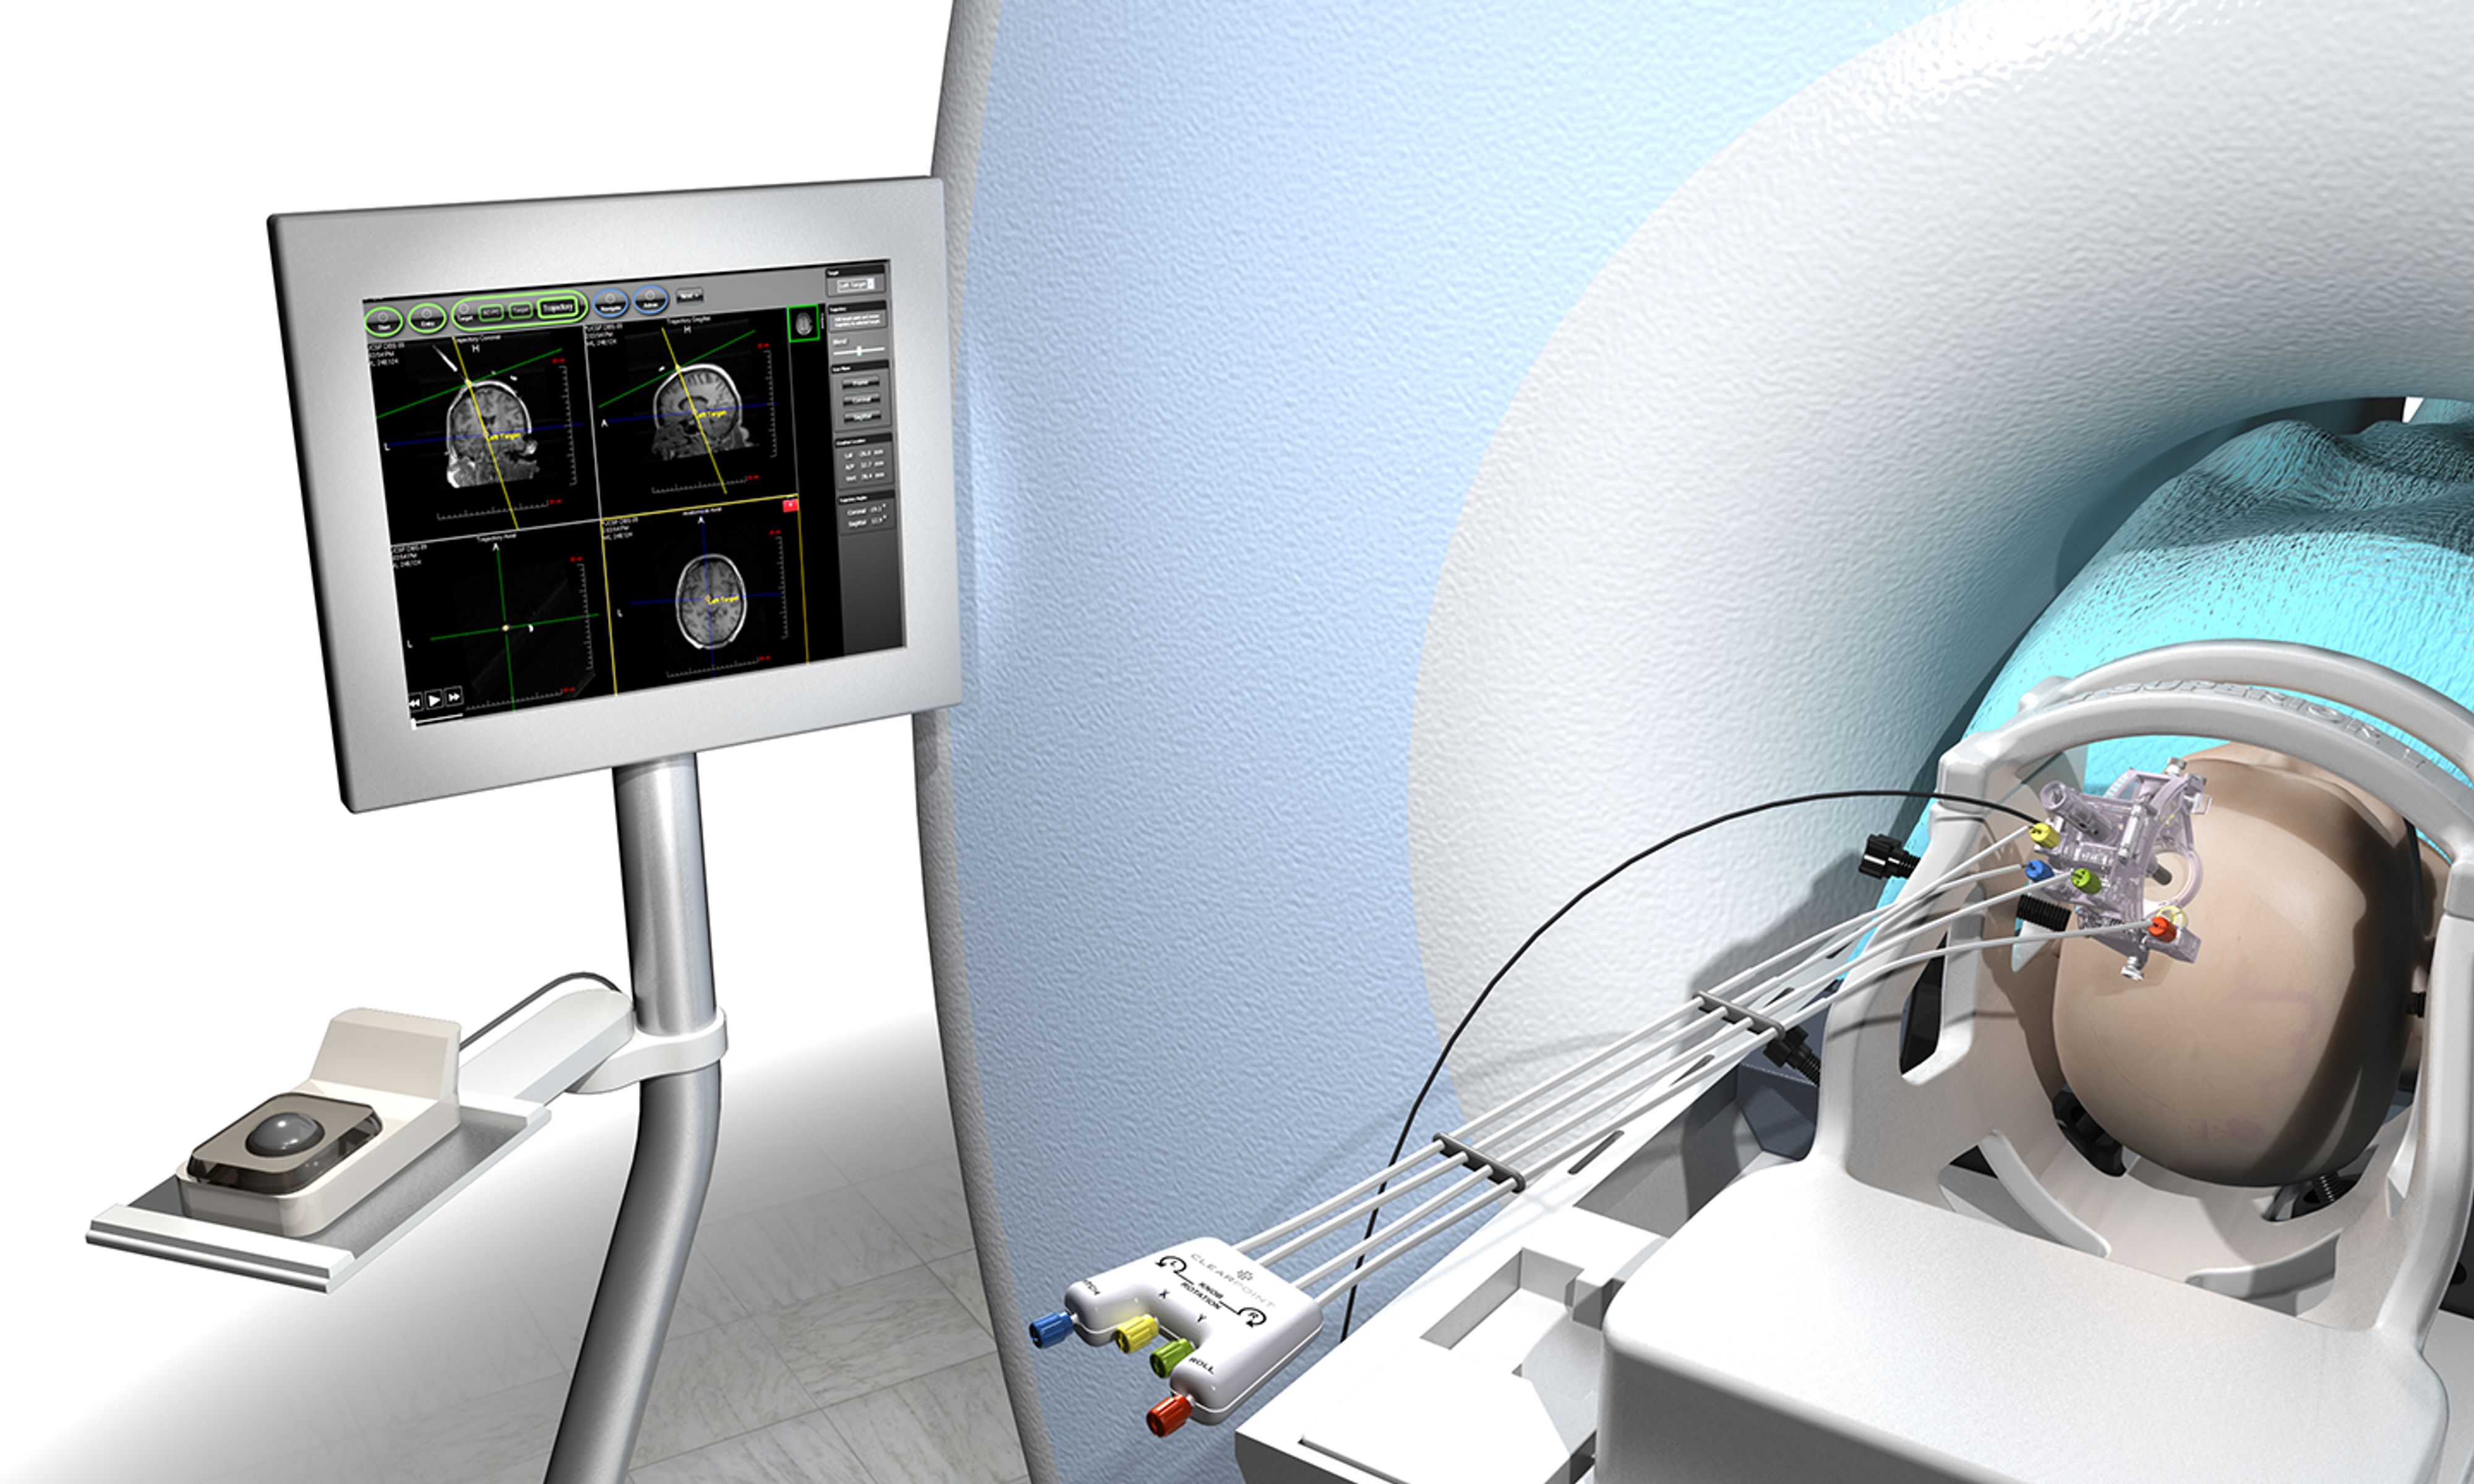 Rendering of the surgical device being used on a patient in a CT machine, with a monitor of the patient’s brain activity next to the CT machine